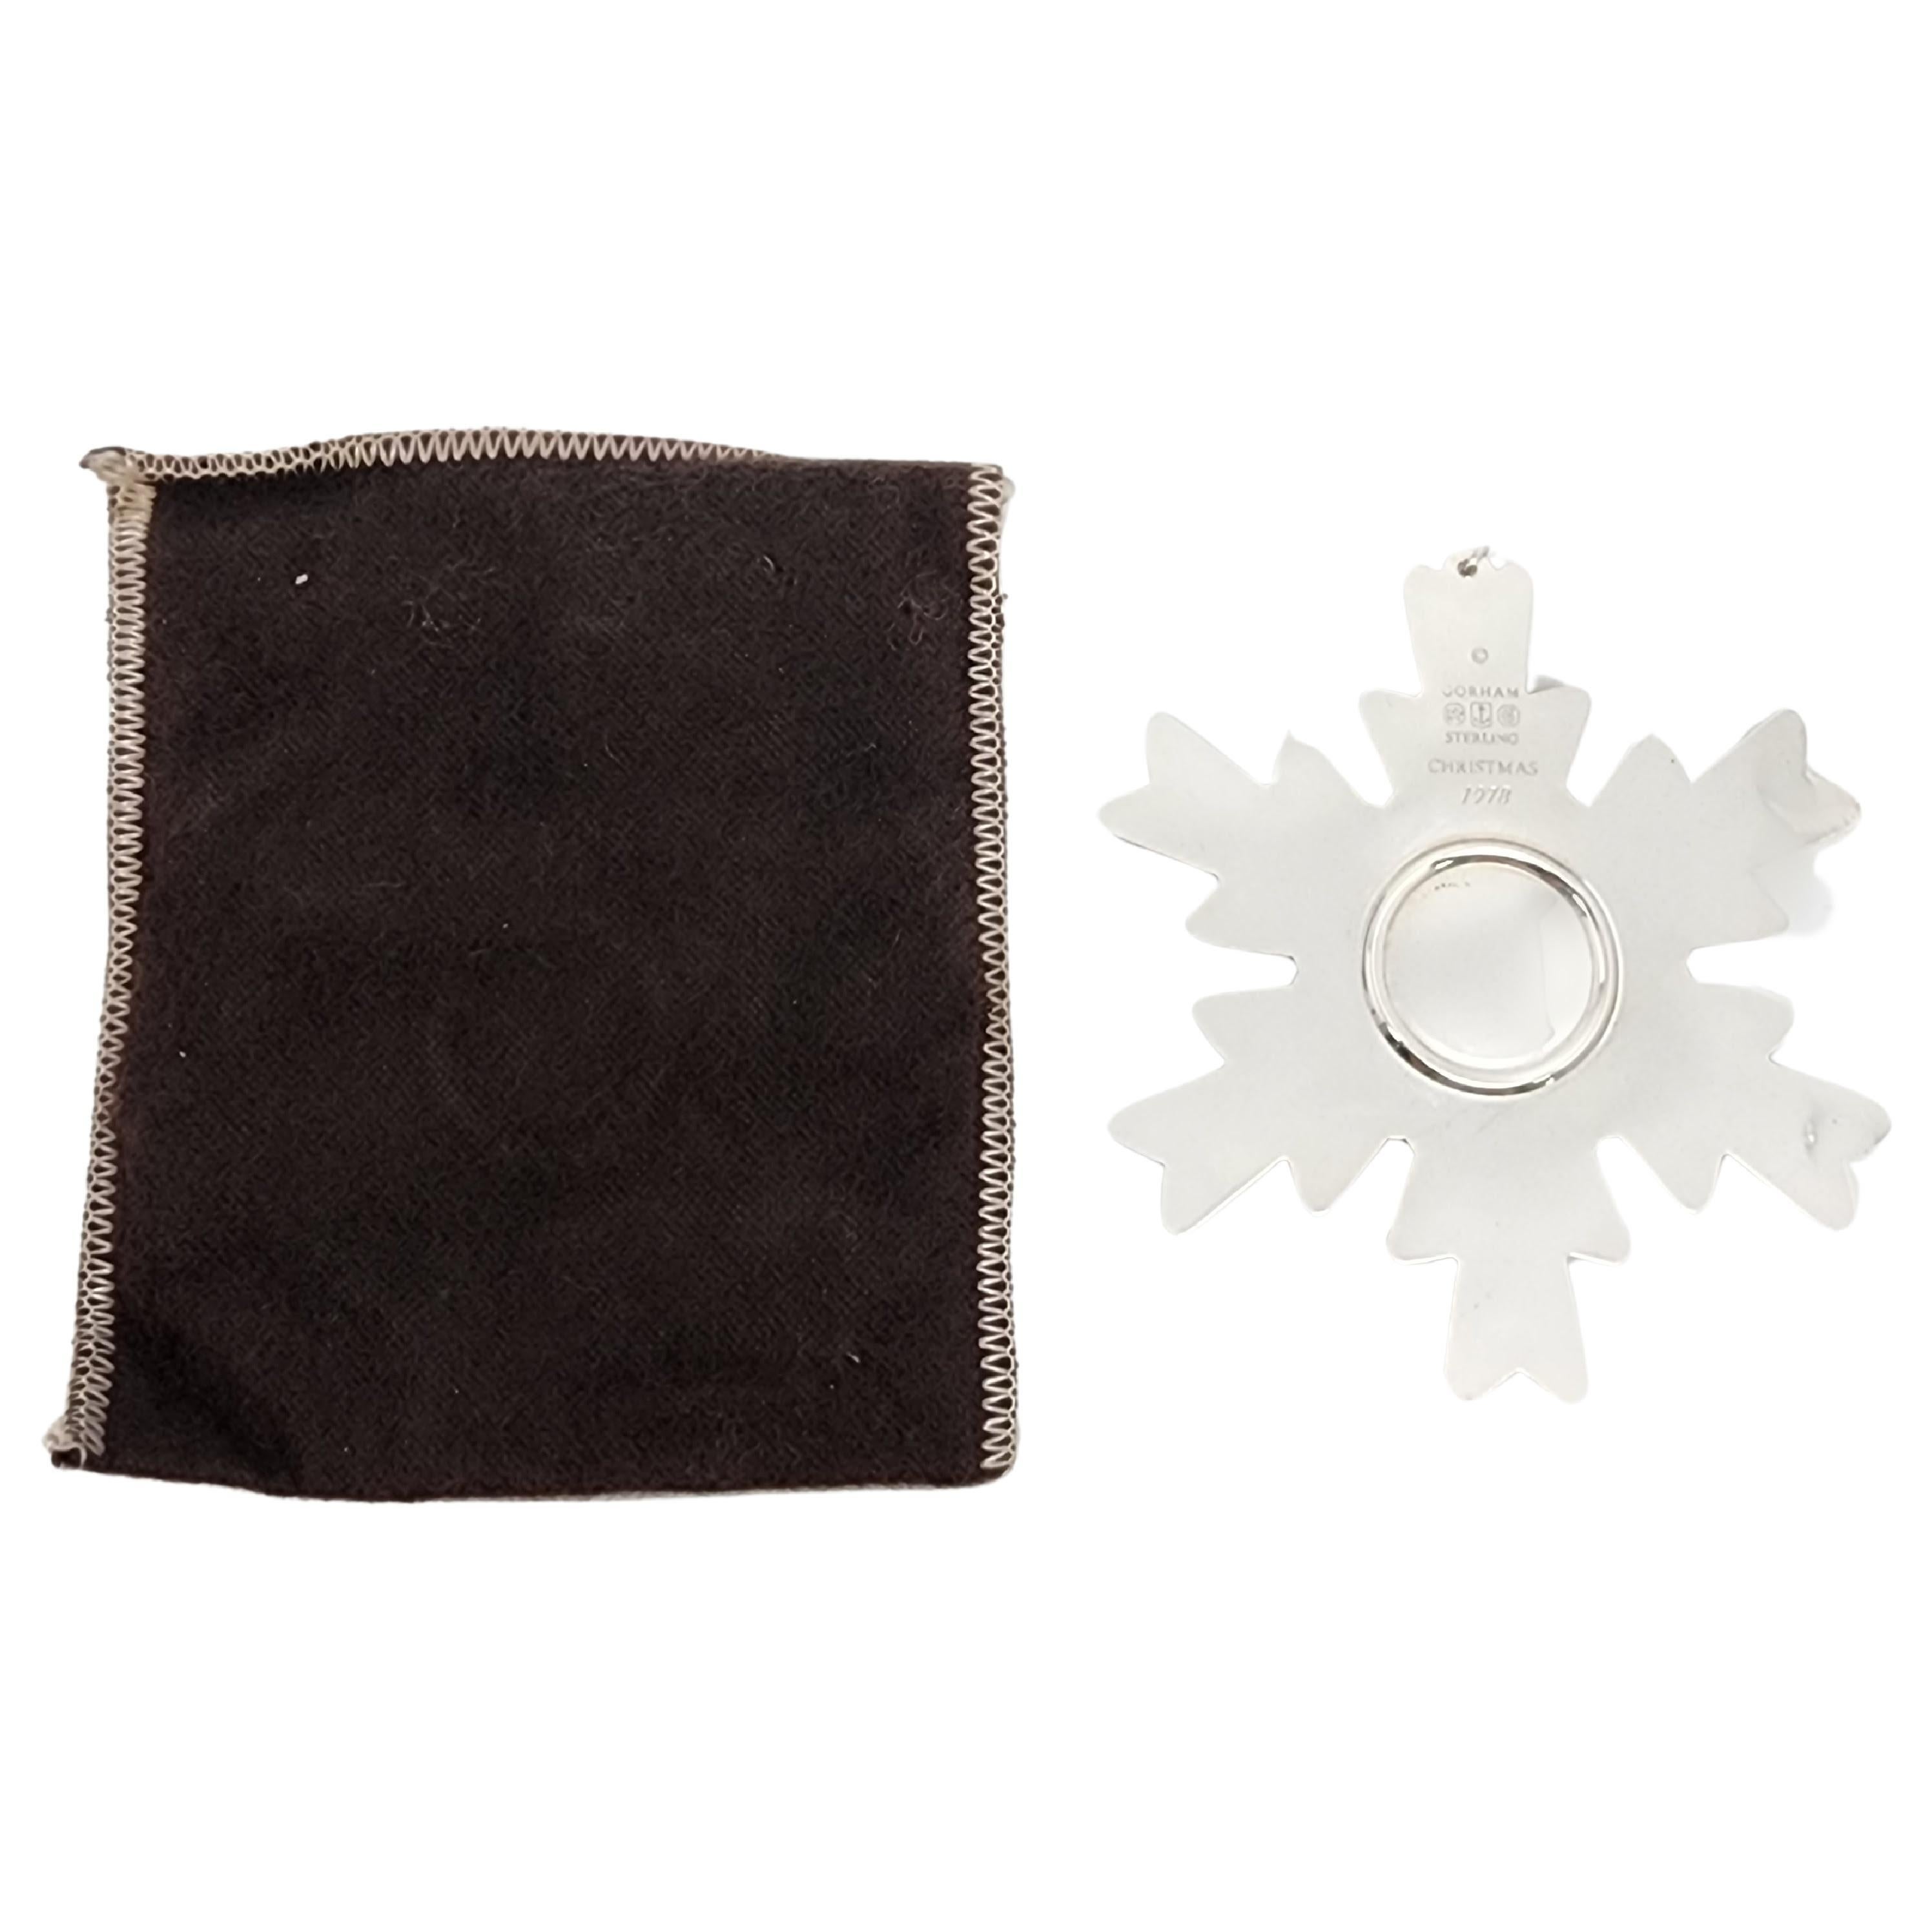 Gorham sterling silver snowflake ornament from 1978 with pouch.

Since 1970, Gorham has been celebrating the season with a yearly version of the classic snowflake form, creating a beautiful tradition of sparkling art. Includes original Gorham felt